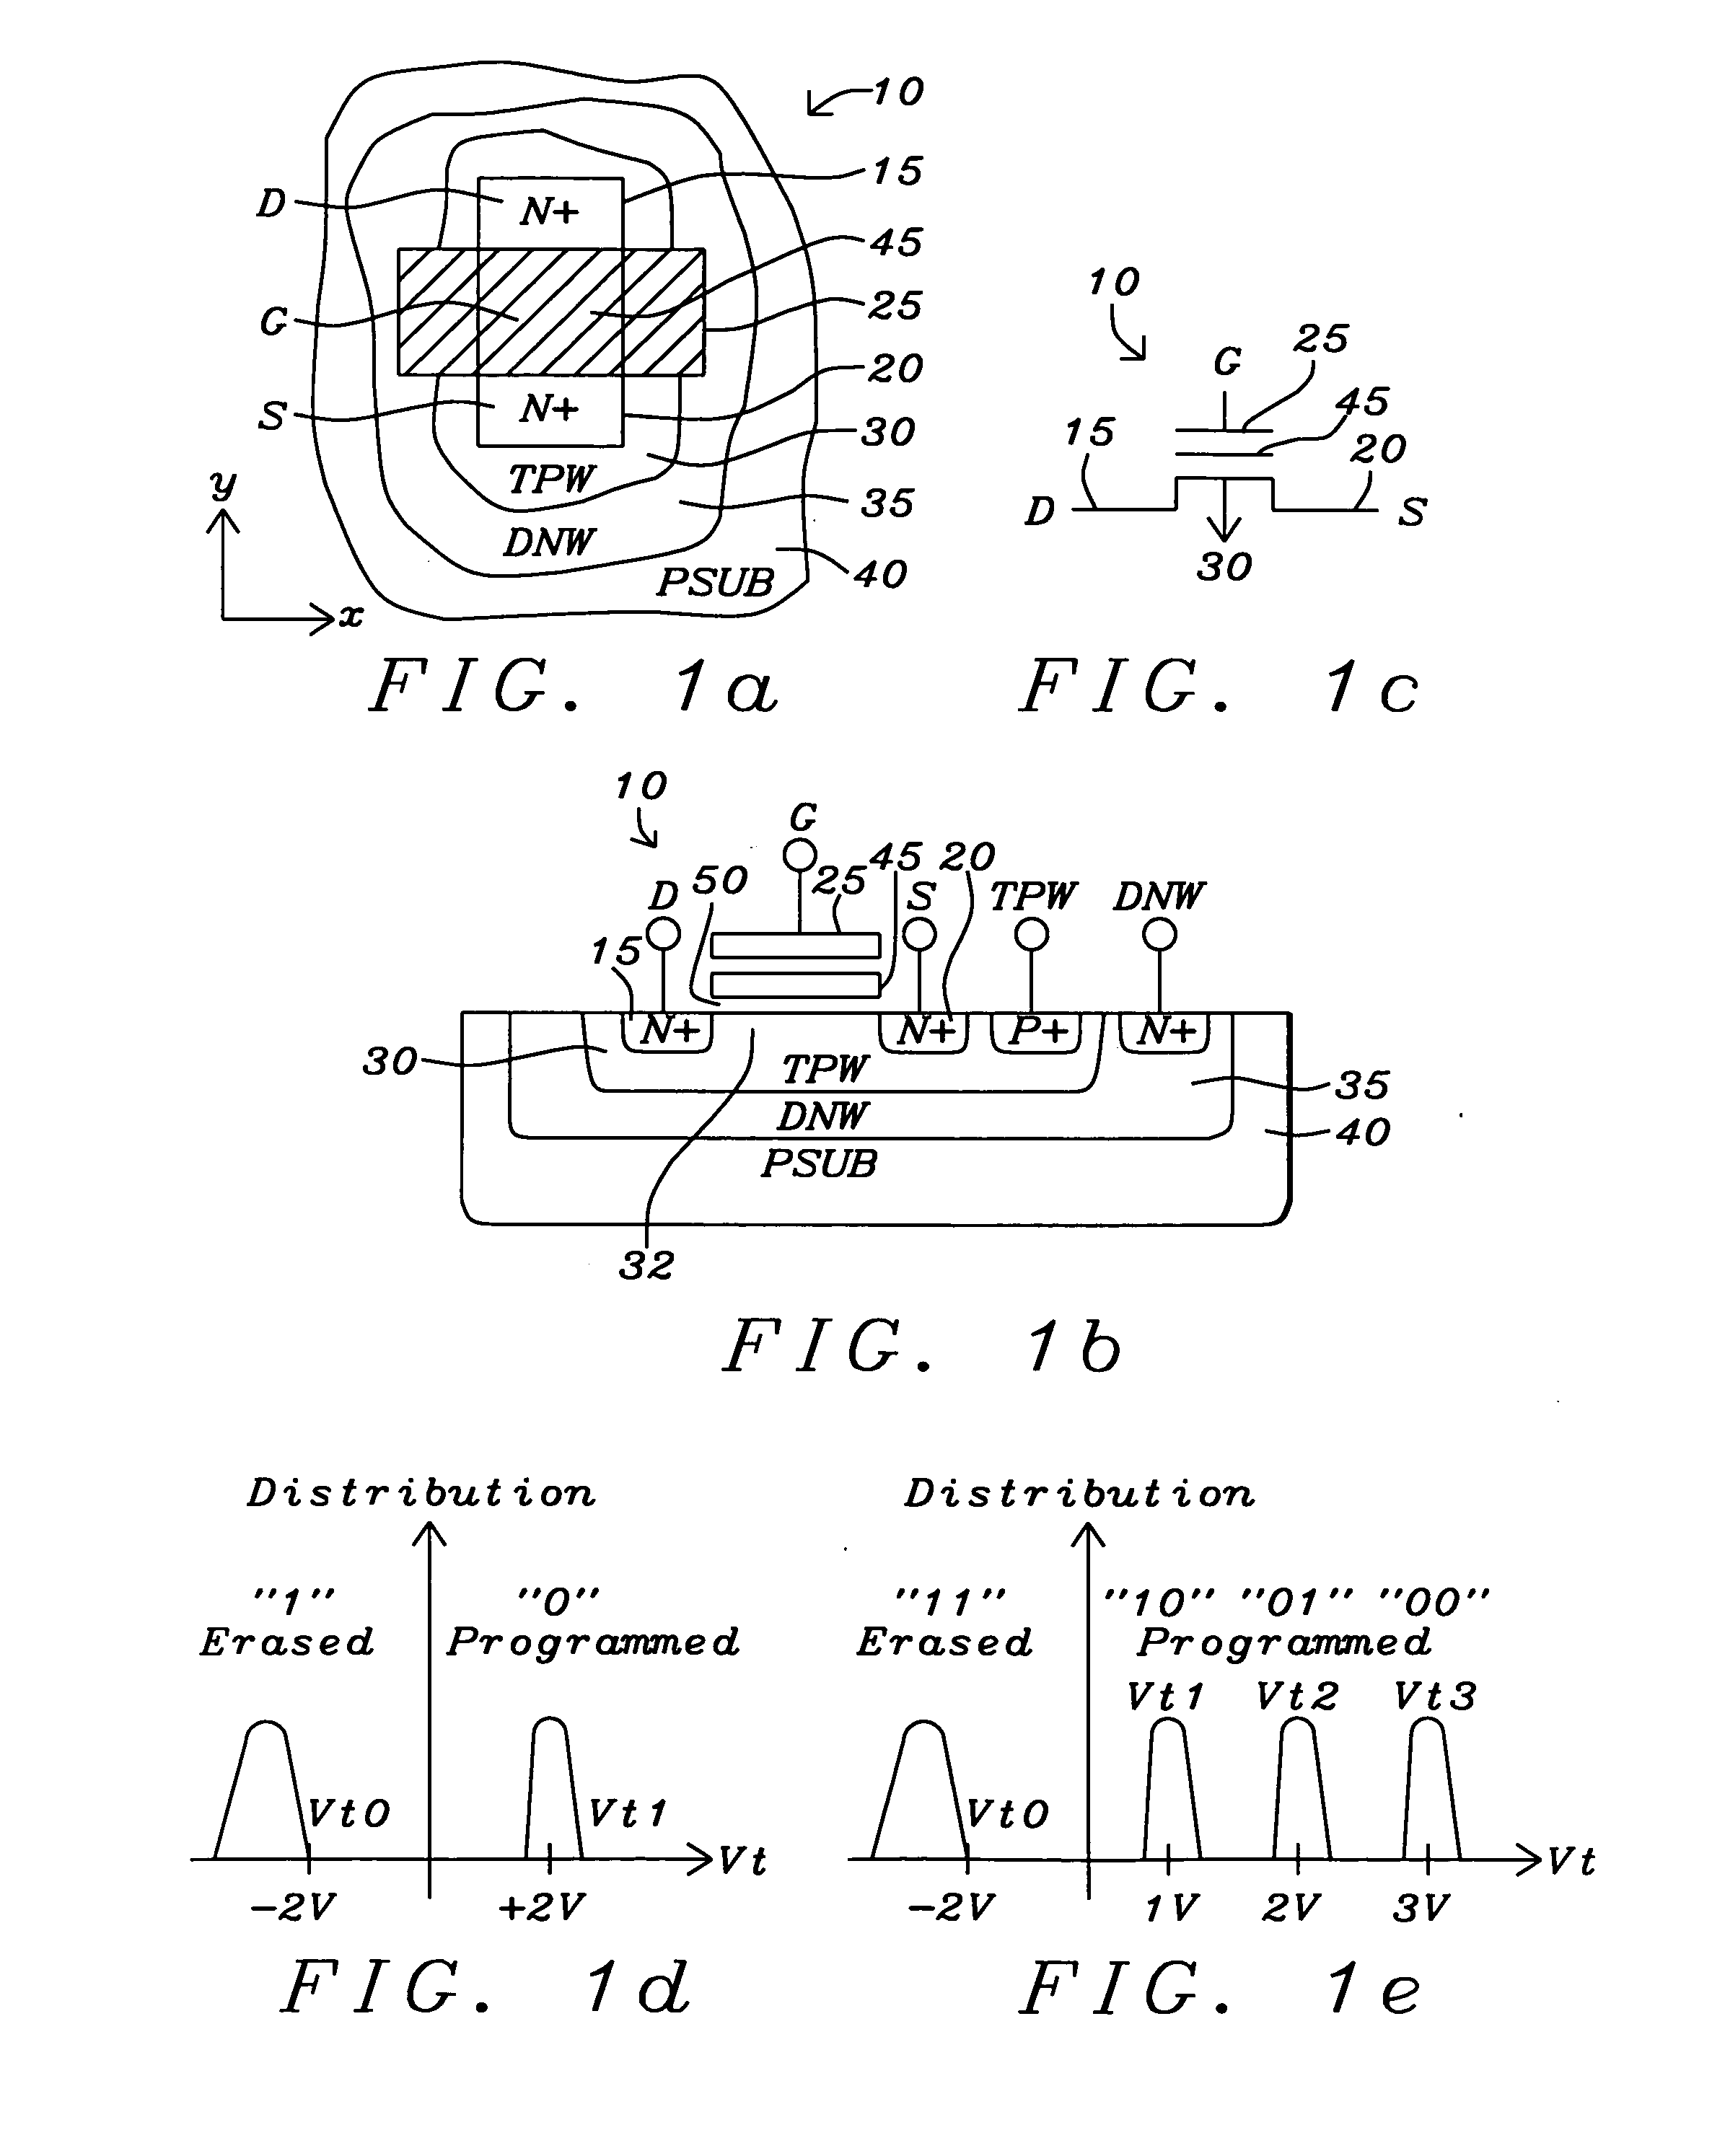 NAND based NMOS NOR flash memory cell, a NAND based NMOS nor flash memory array, and a method of forming a NAND based NMOS NOR flash memory array